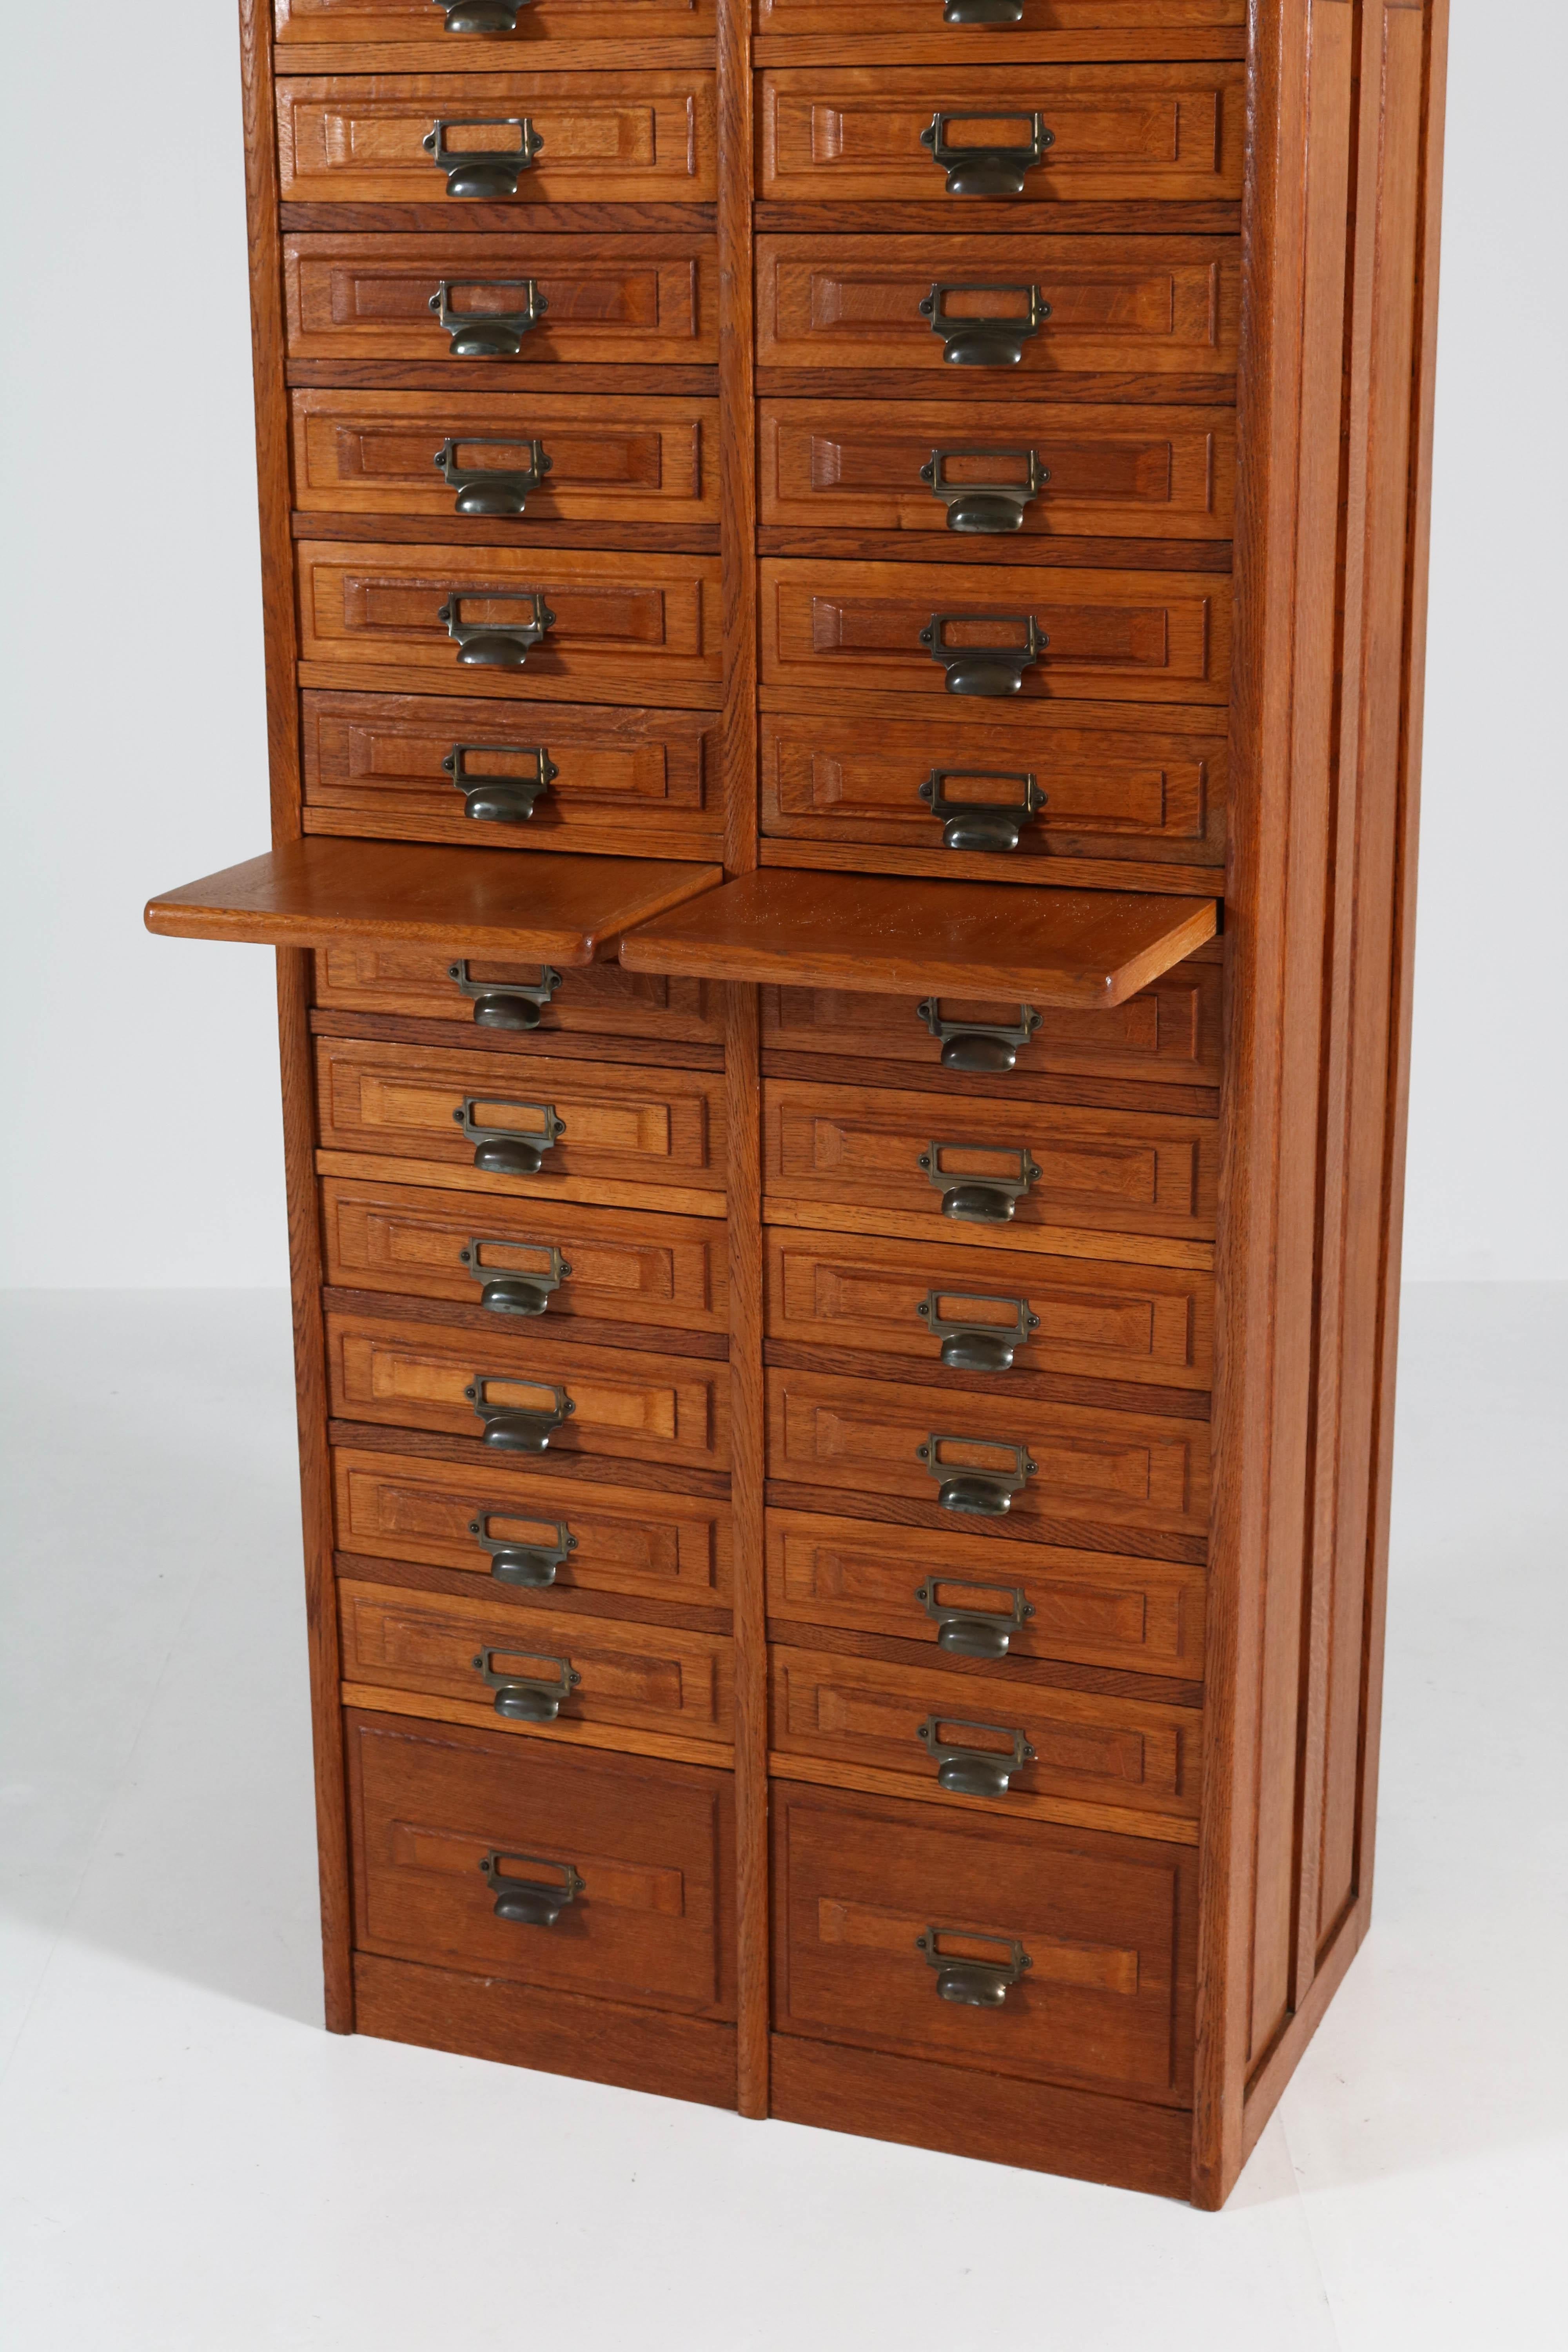 Stunning French Art Deco file cabinet, 1920s.
Solid oak with 26 original solid oak drawers.
In good original condition with minor wear consistent with age and use,
preserving a beautiful patina.
 